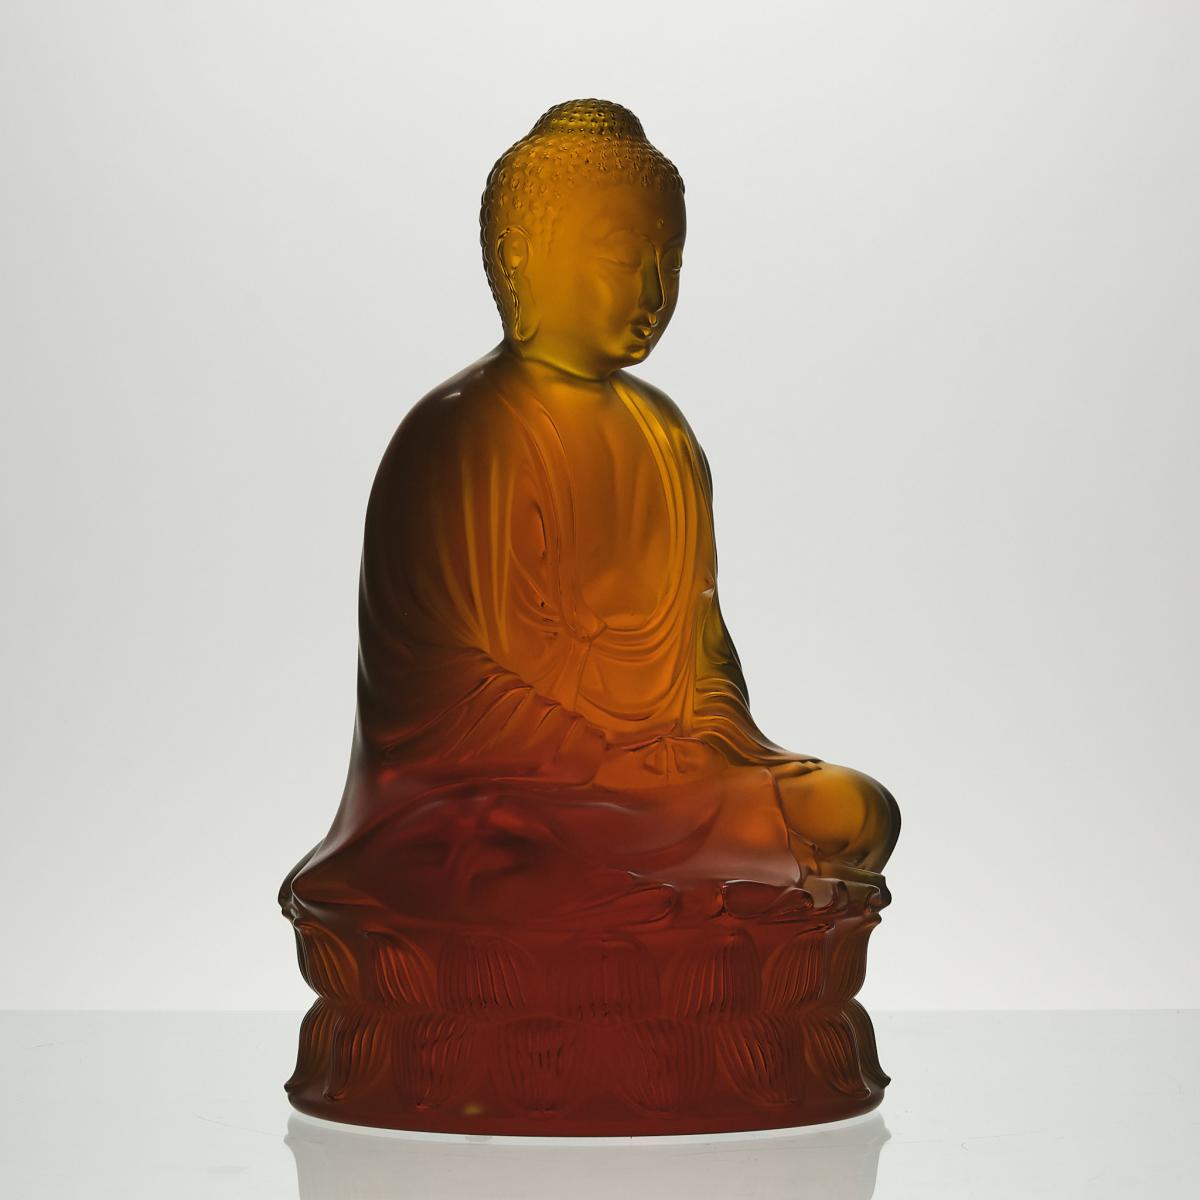 20th Century Crystal Glass Sculpture entitled "Seated Buddha" by Lalique Glass